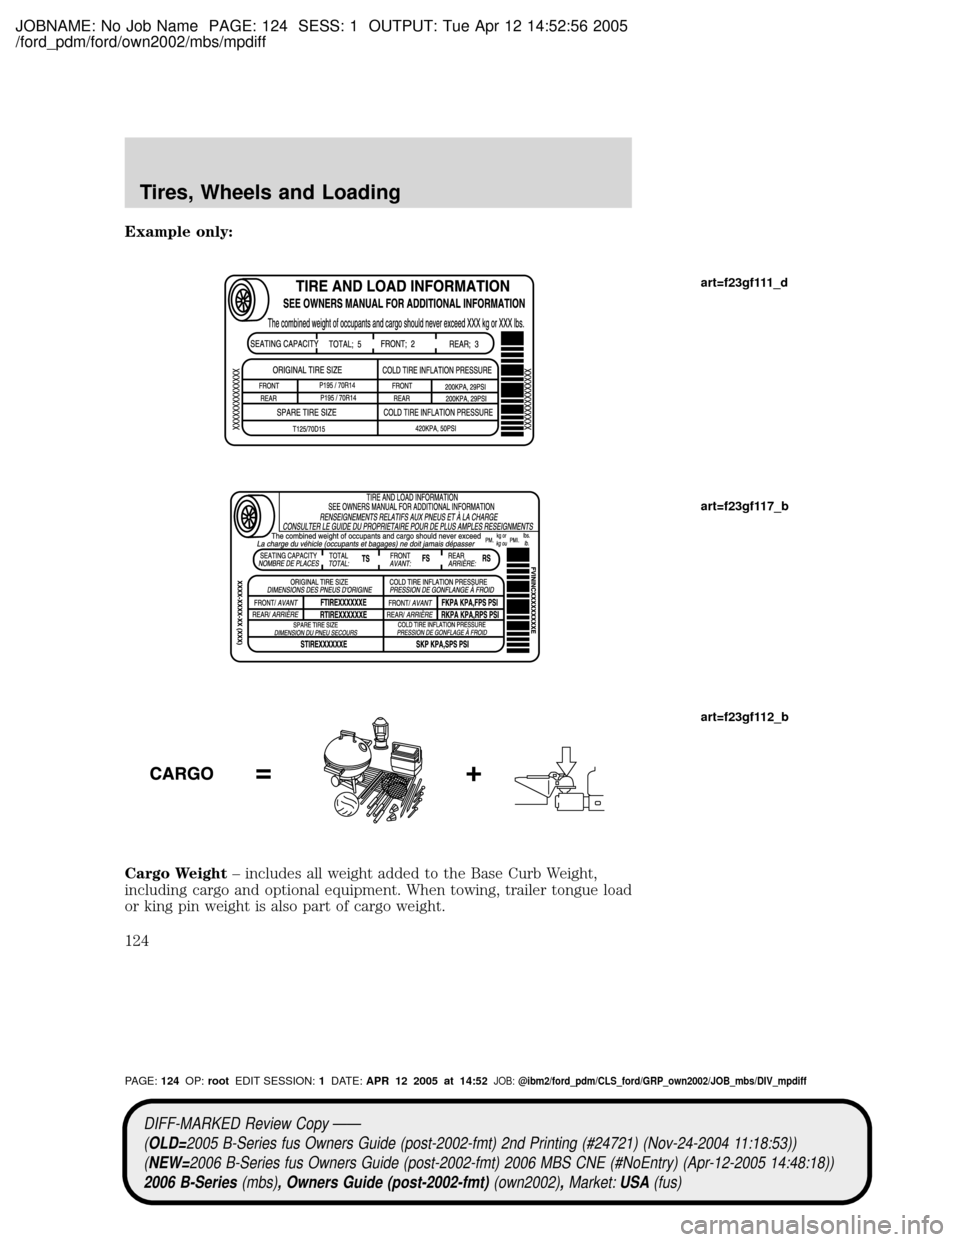 MAZDA MODEL B2300 TRUCK 2006  Owners Manual (in English) JOBNAME: No Job Name PAGE: 124 SESS: 1 OUTPUT: Tue Apr 12 14:52:56 2005
/ford_pdm/ford/own2002/mbs/mpdiff
Example only:
Cargo Weight± includes all weight added to the Base Curb Weight,
including carg